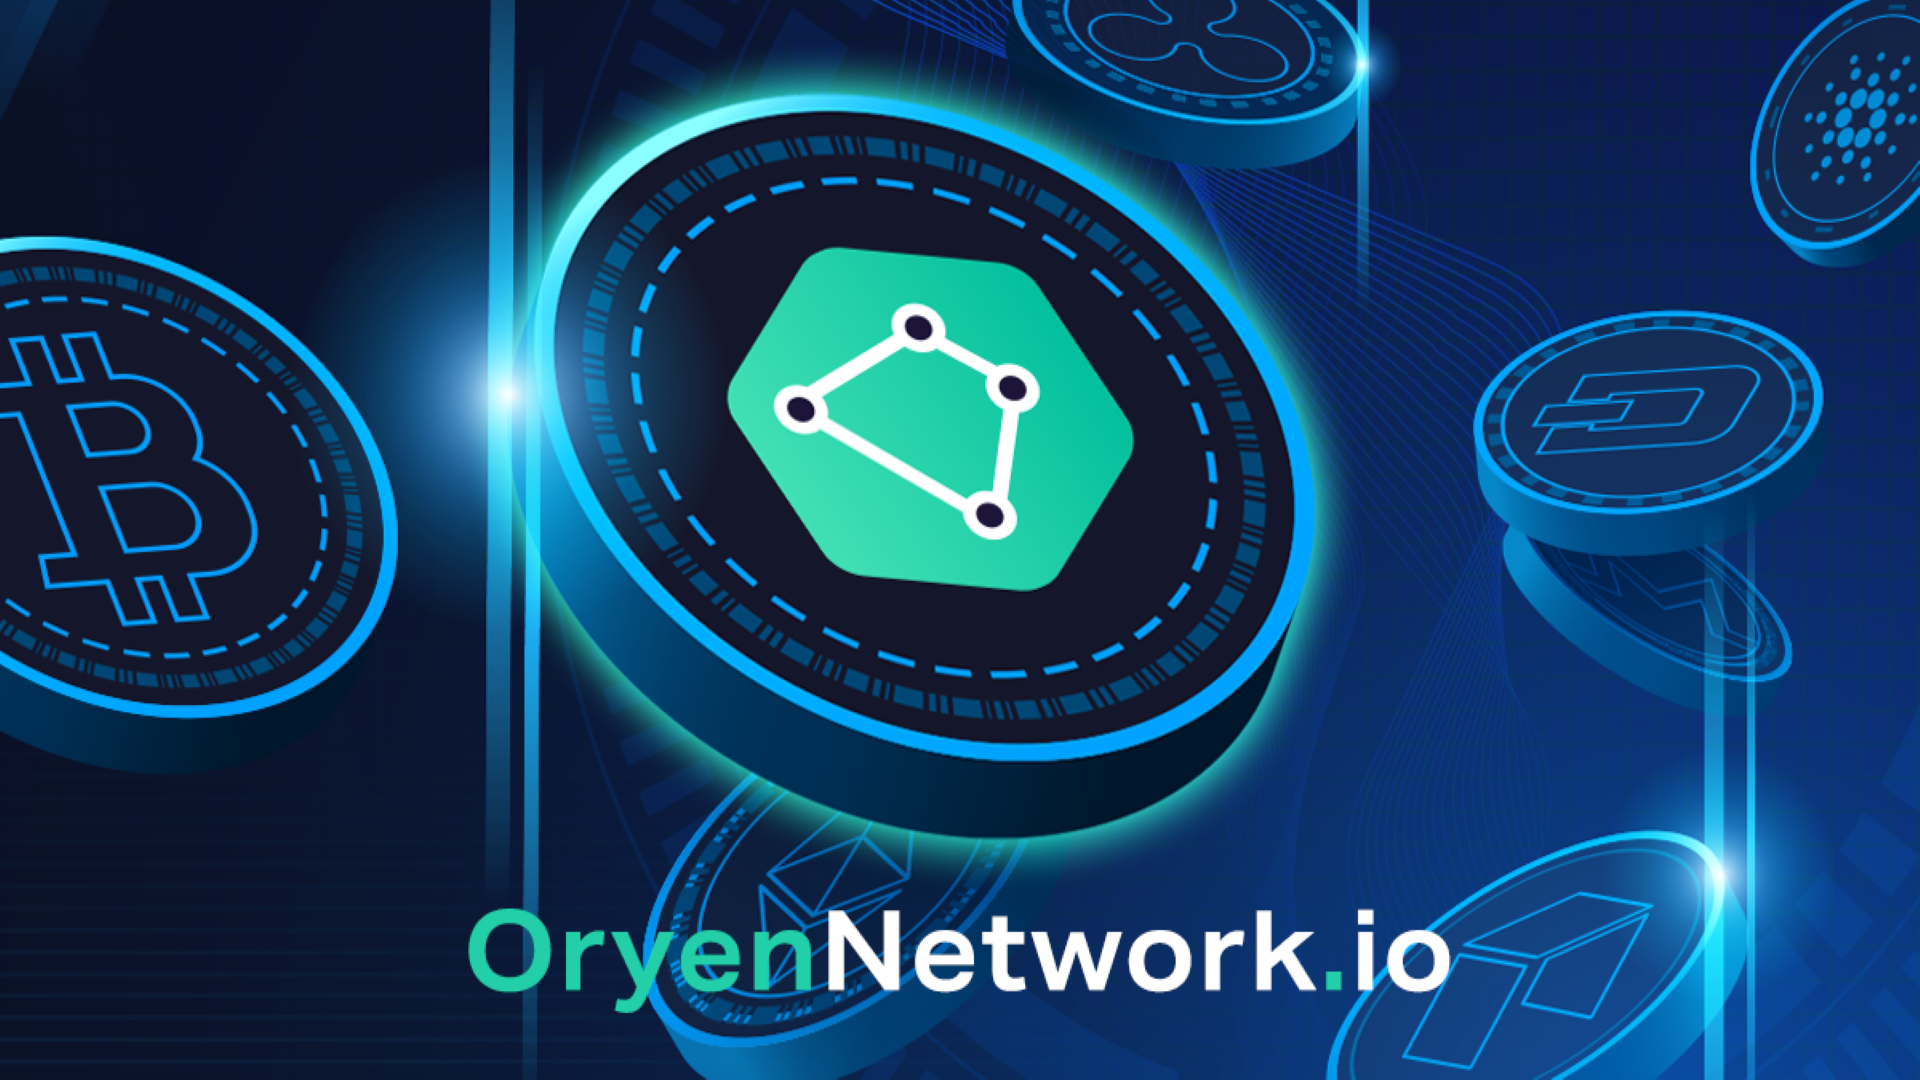 Oryen Network Secures All User Funds On Chain Unlike Many CEXs, FTX Declares Bankruptcy Due To Insolvency